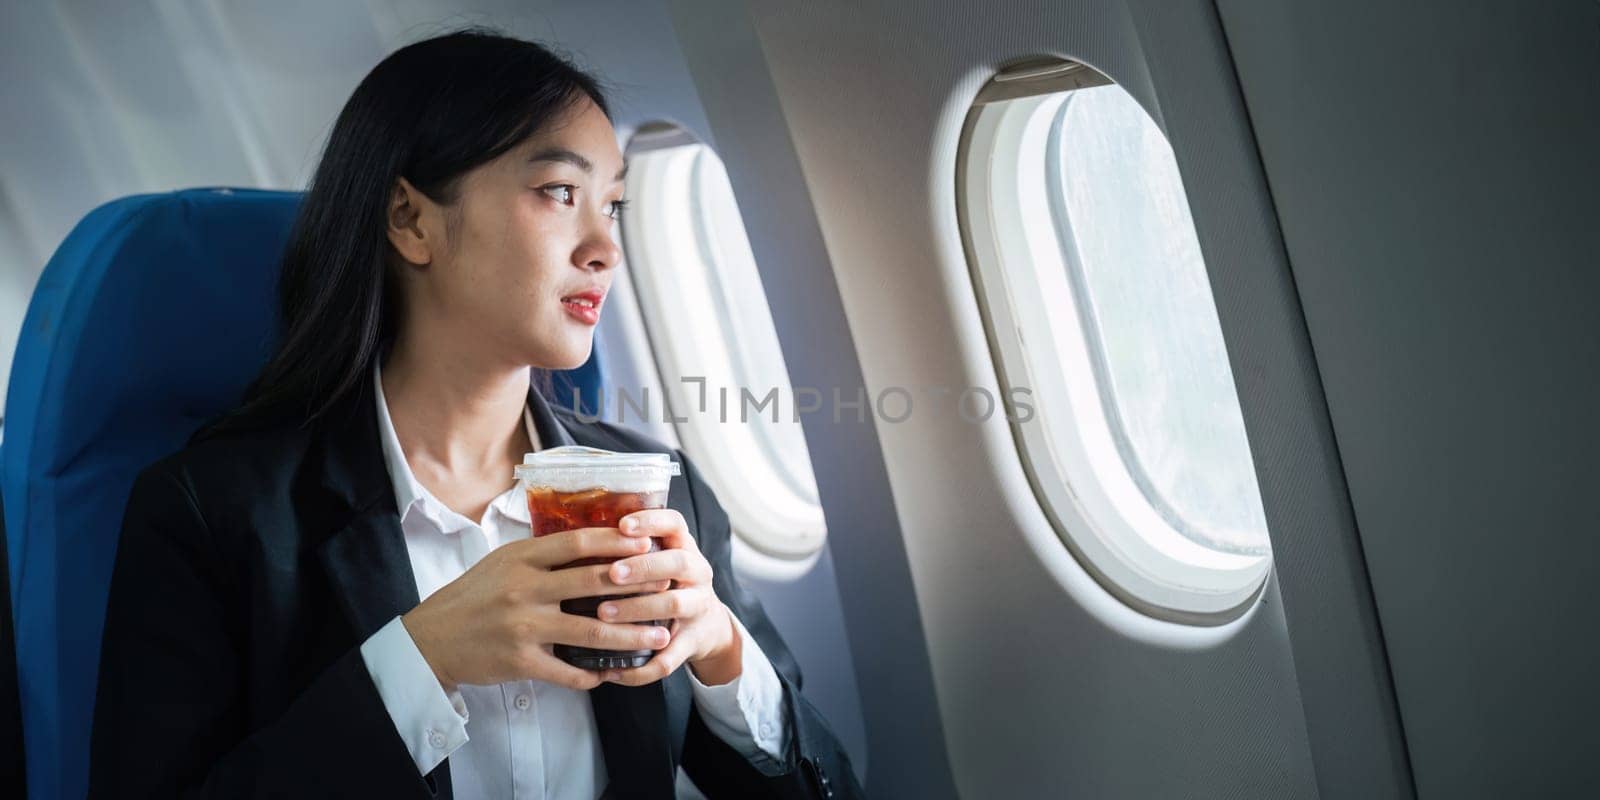 Successful Asian business woman, Business woman working in airplane on laptop computer and looking out the window.